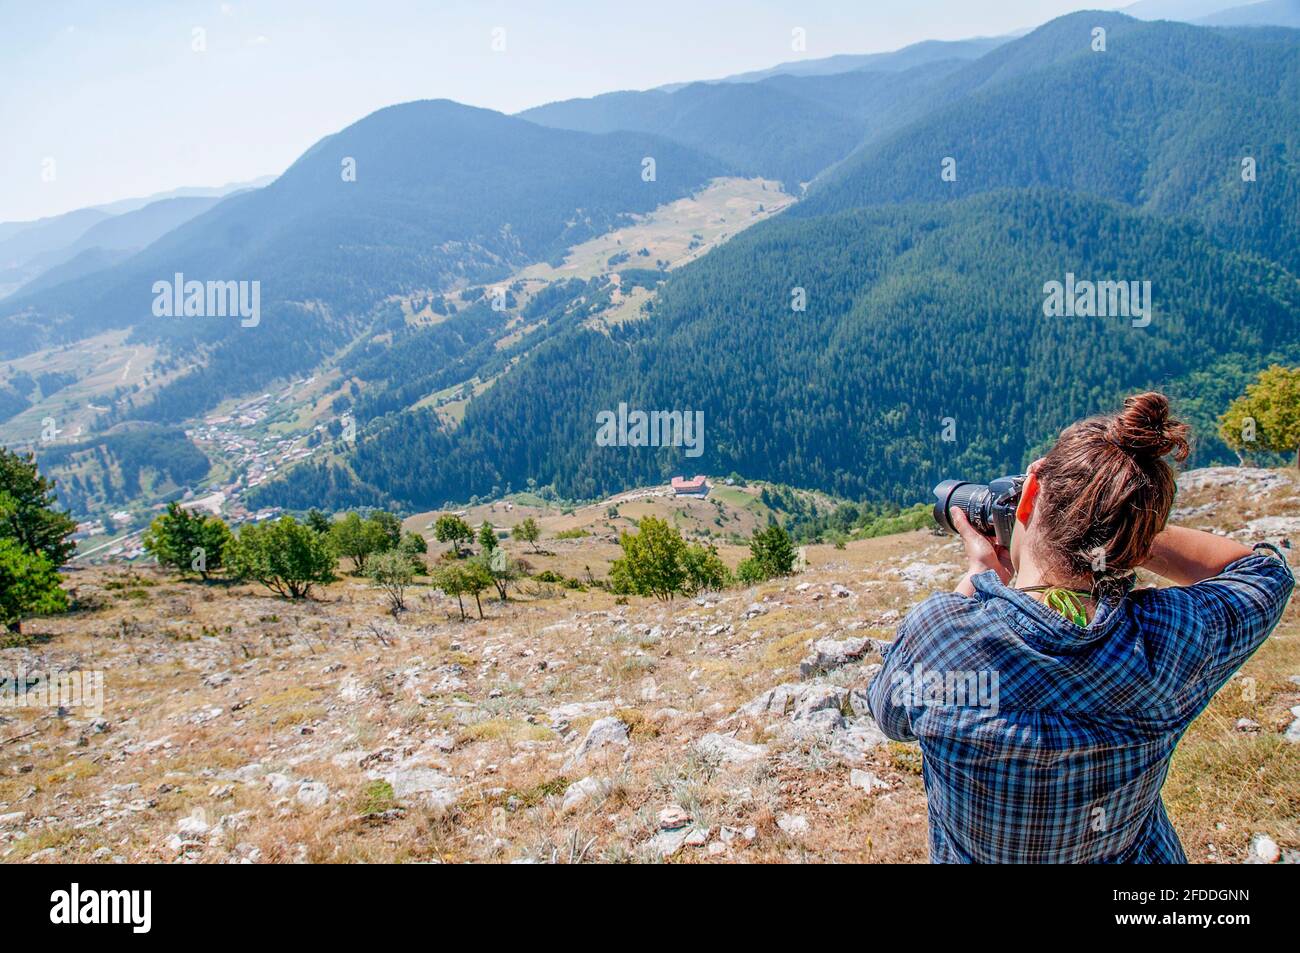 A young woman taking a photo on a mountain. Lifestyle blogging/vlogging about healthy living, nature and outdoors. Stock Photo